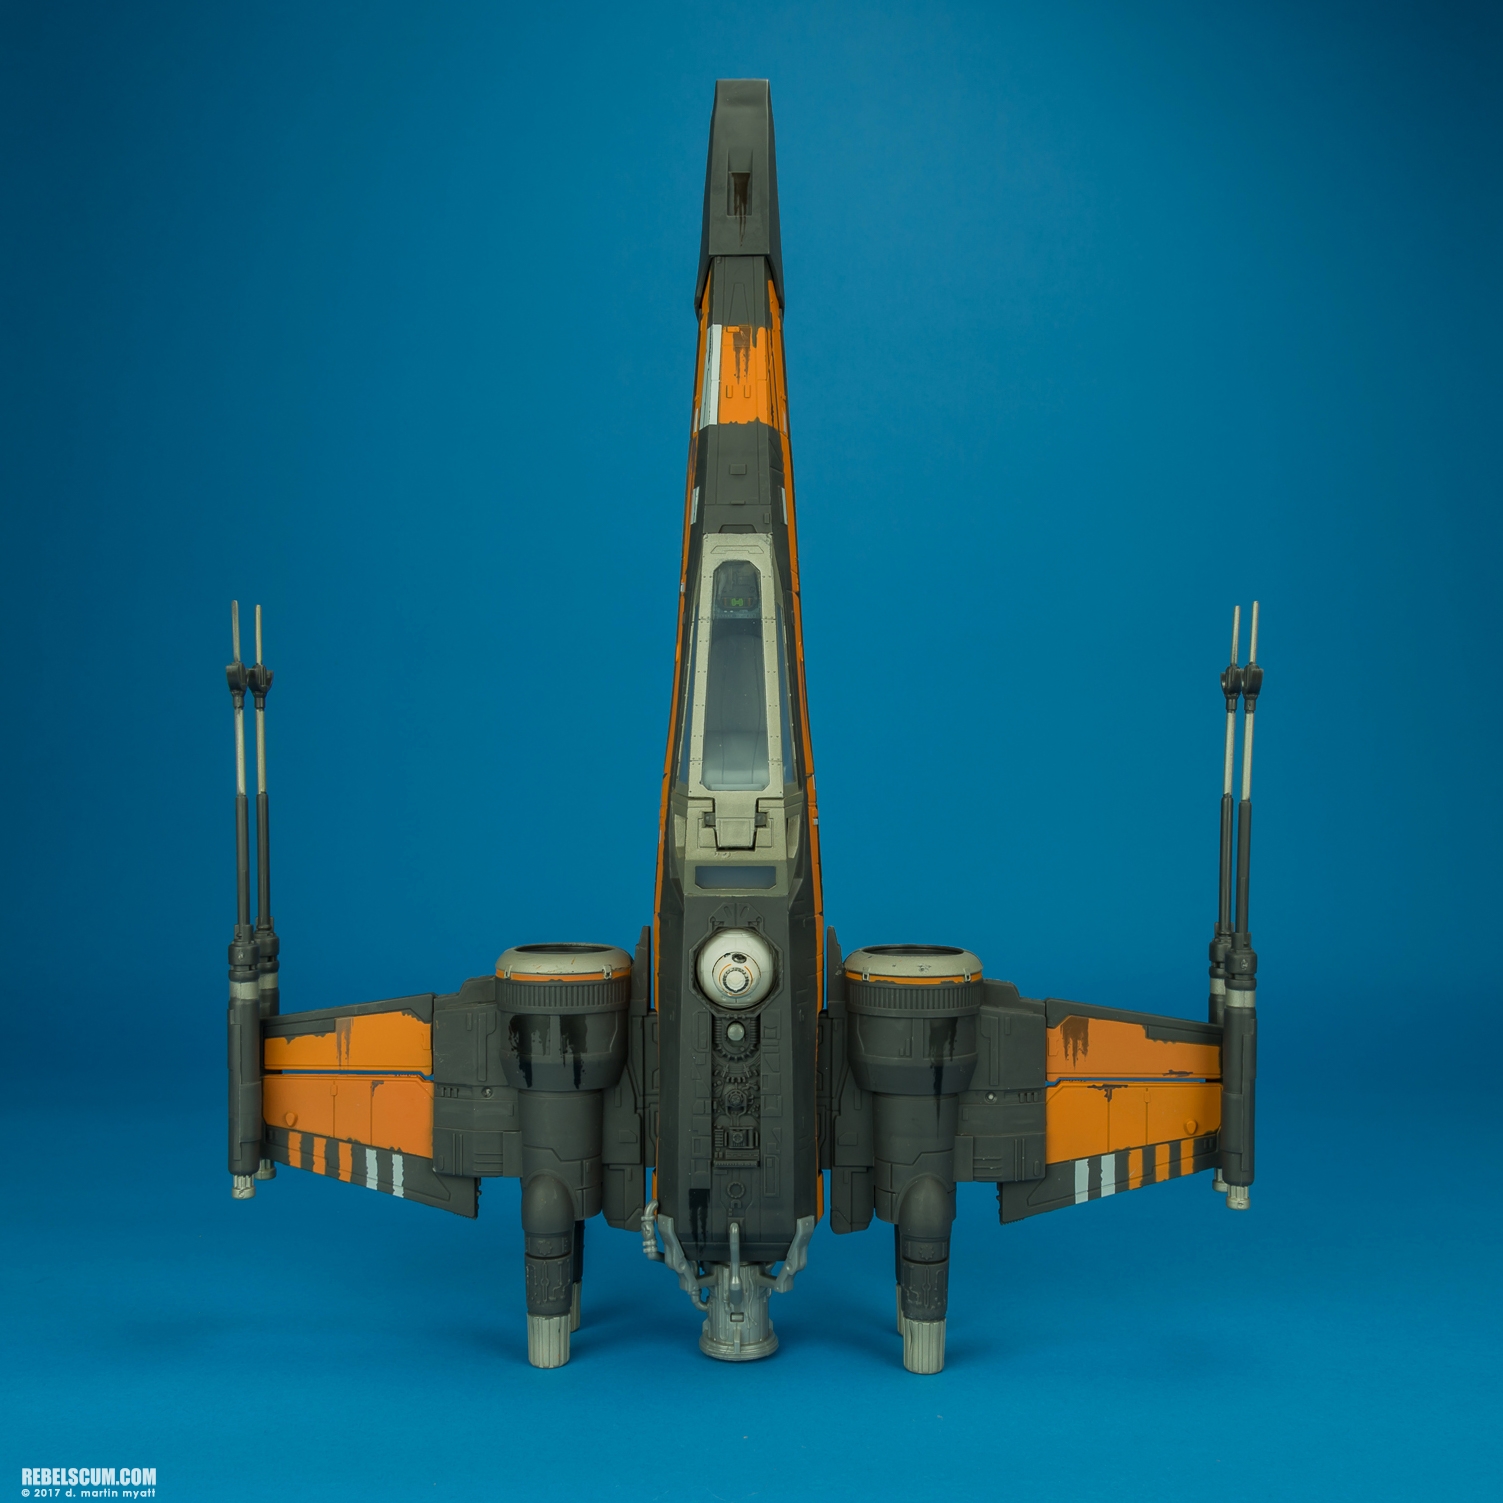 Poes-Boosted-X-Wing-Fighter-The-Last-Jedi-Hasbro-001.jpg